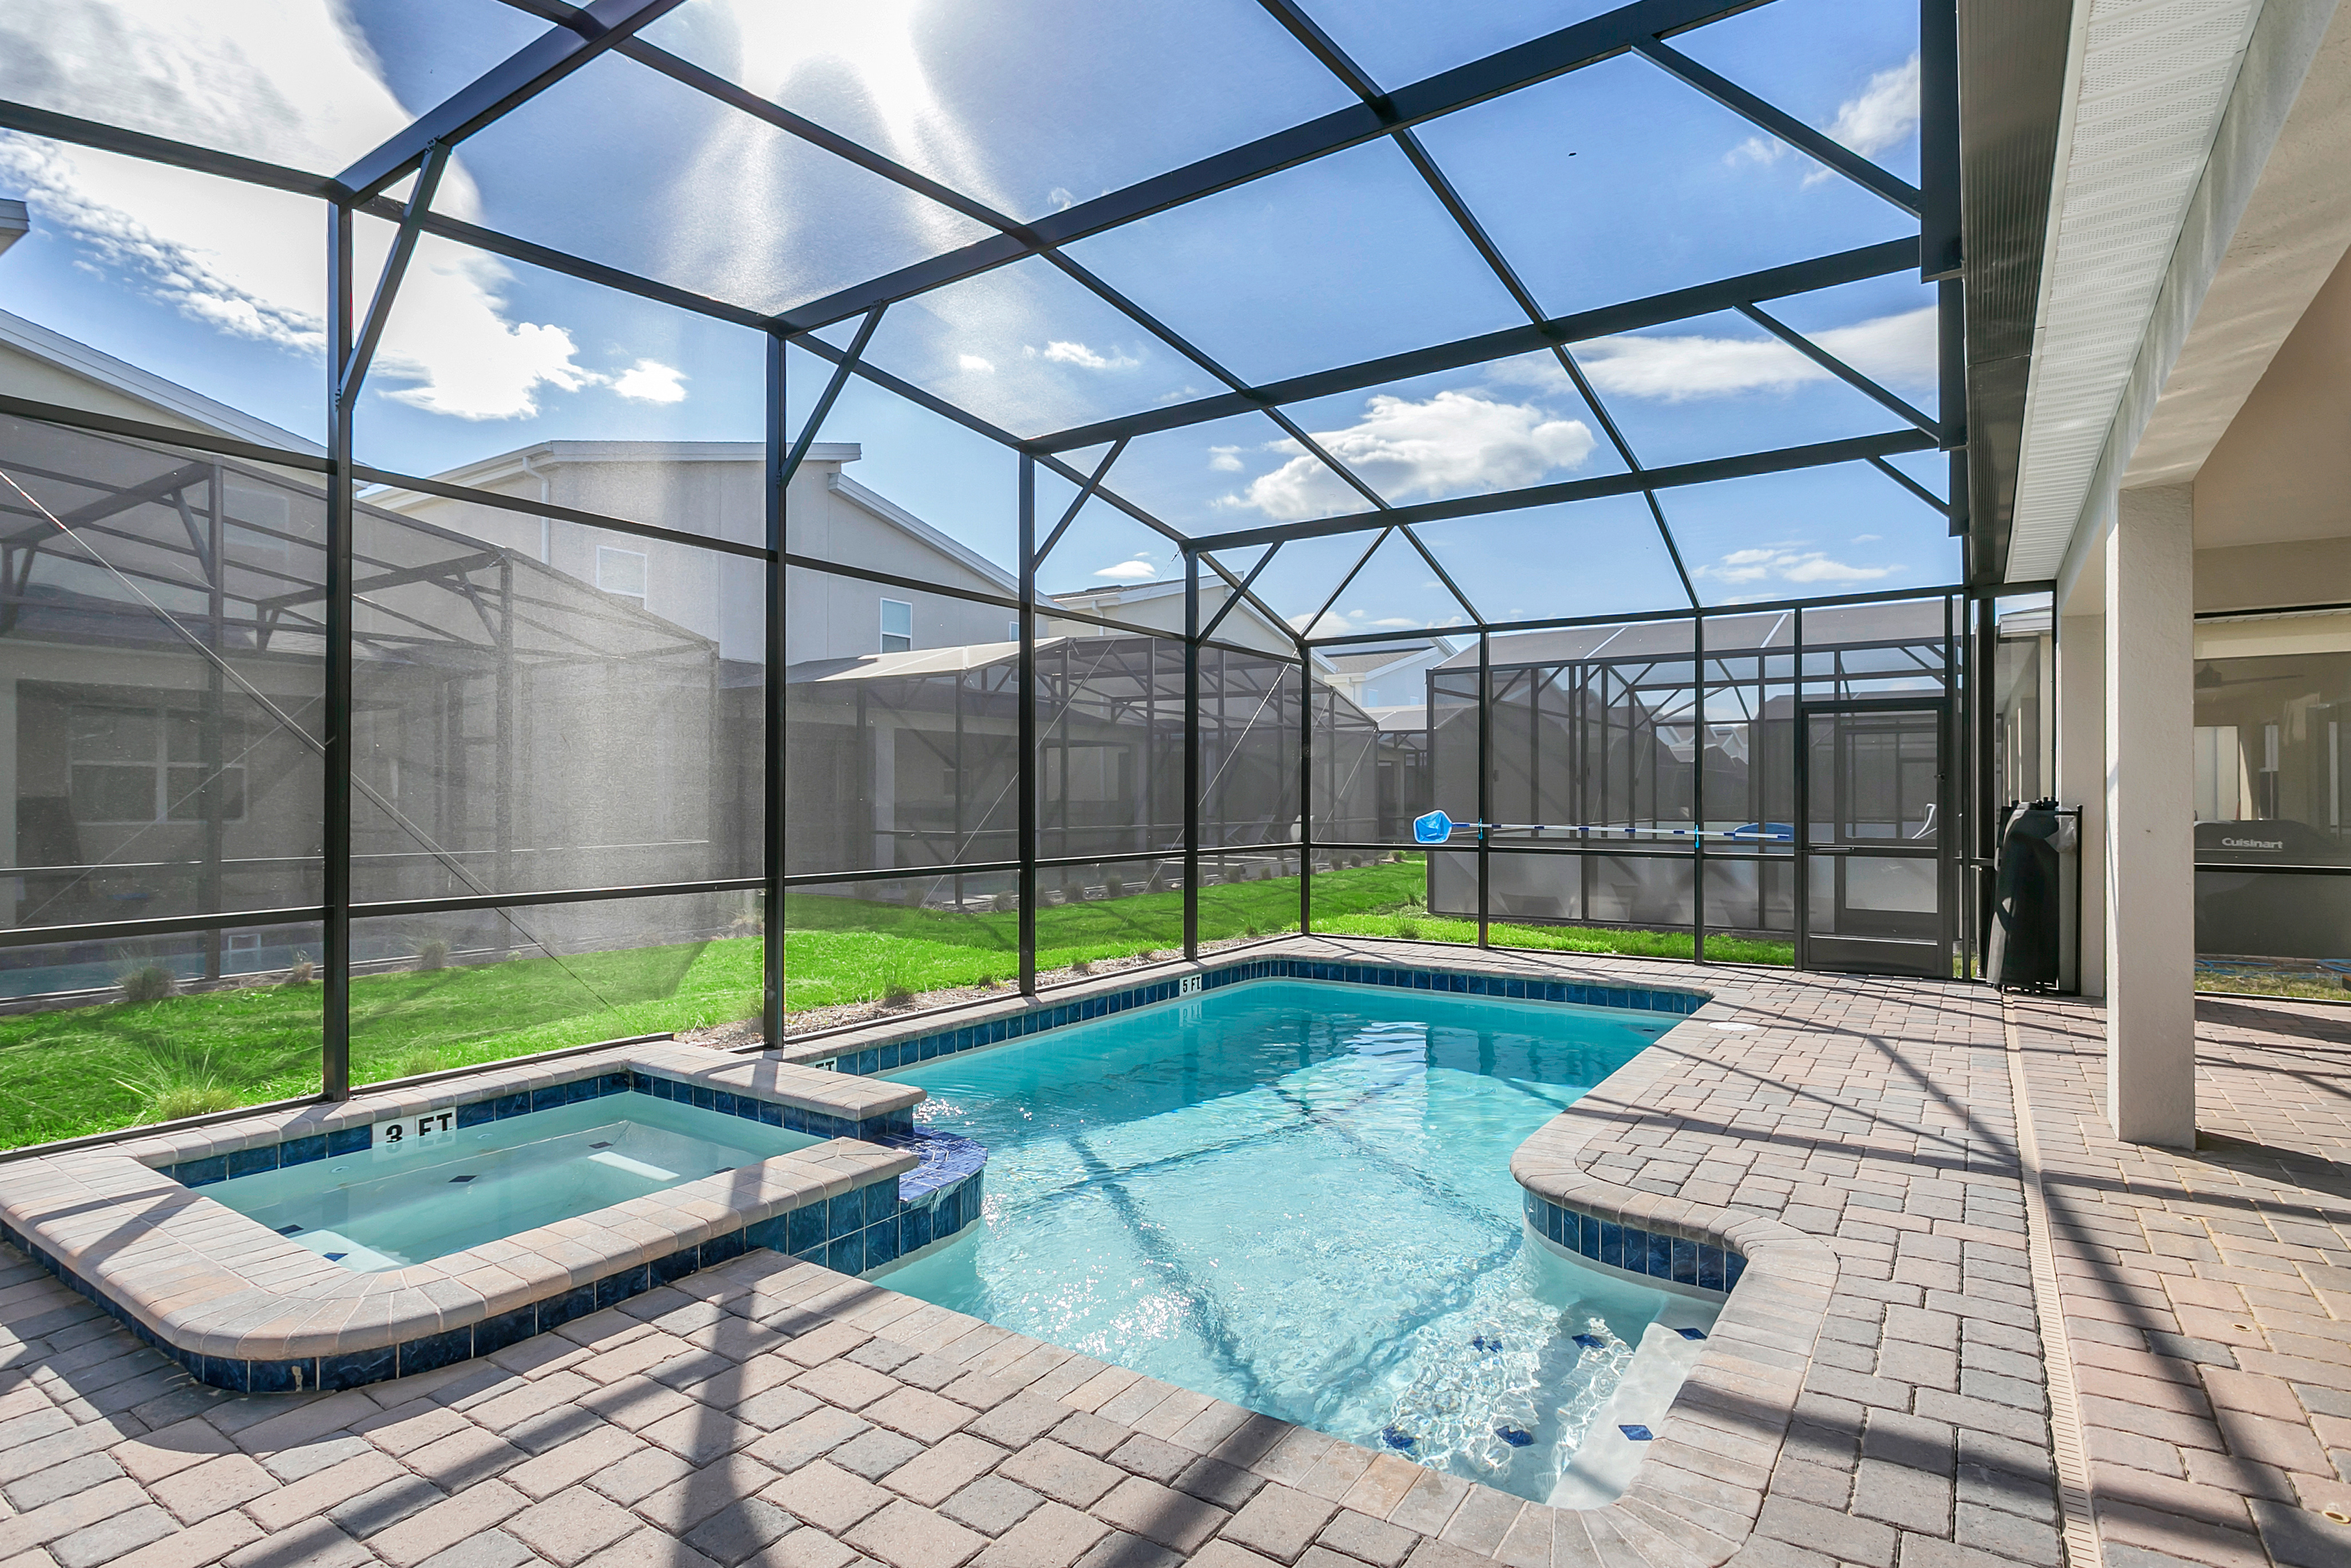 Stunning private pool of the home in Kissimmee Florida - Immerse yourself in the cool elegance of pool - Unwind with a dip in chic and stylish pool area - Experience ultimate relaxation in poolside paradise